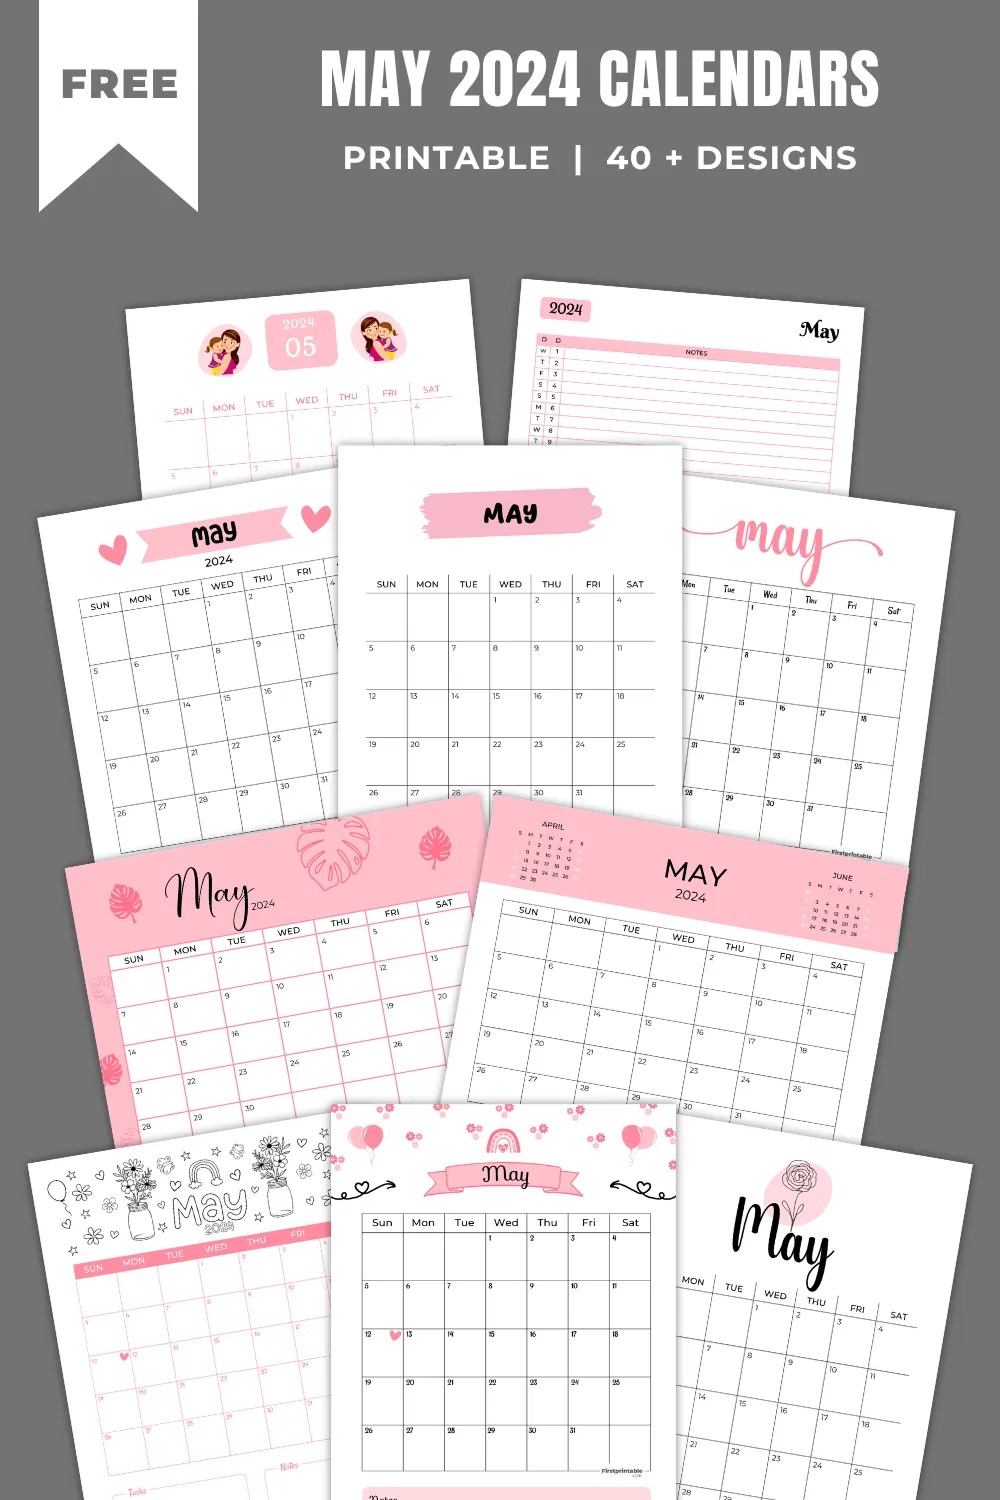 Click here for May 2024 Calendars - New!